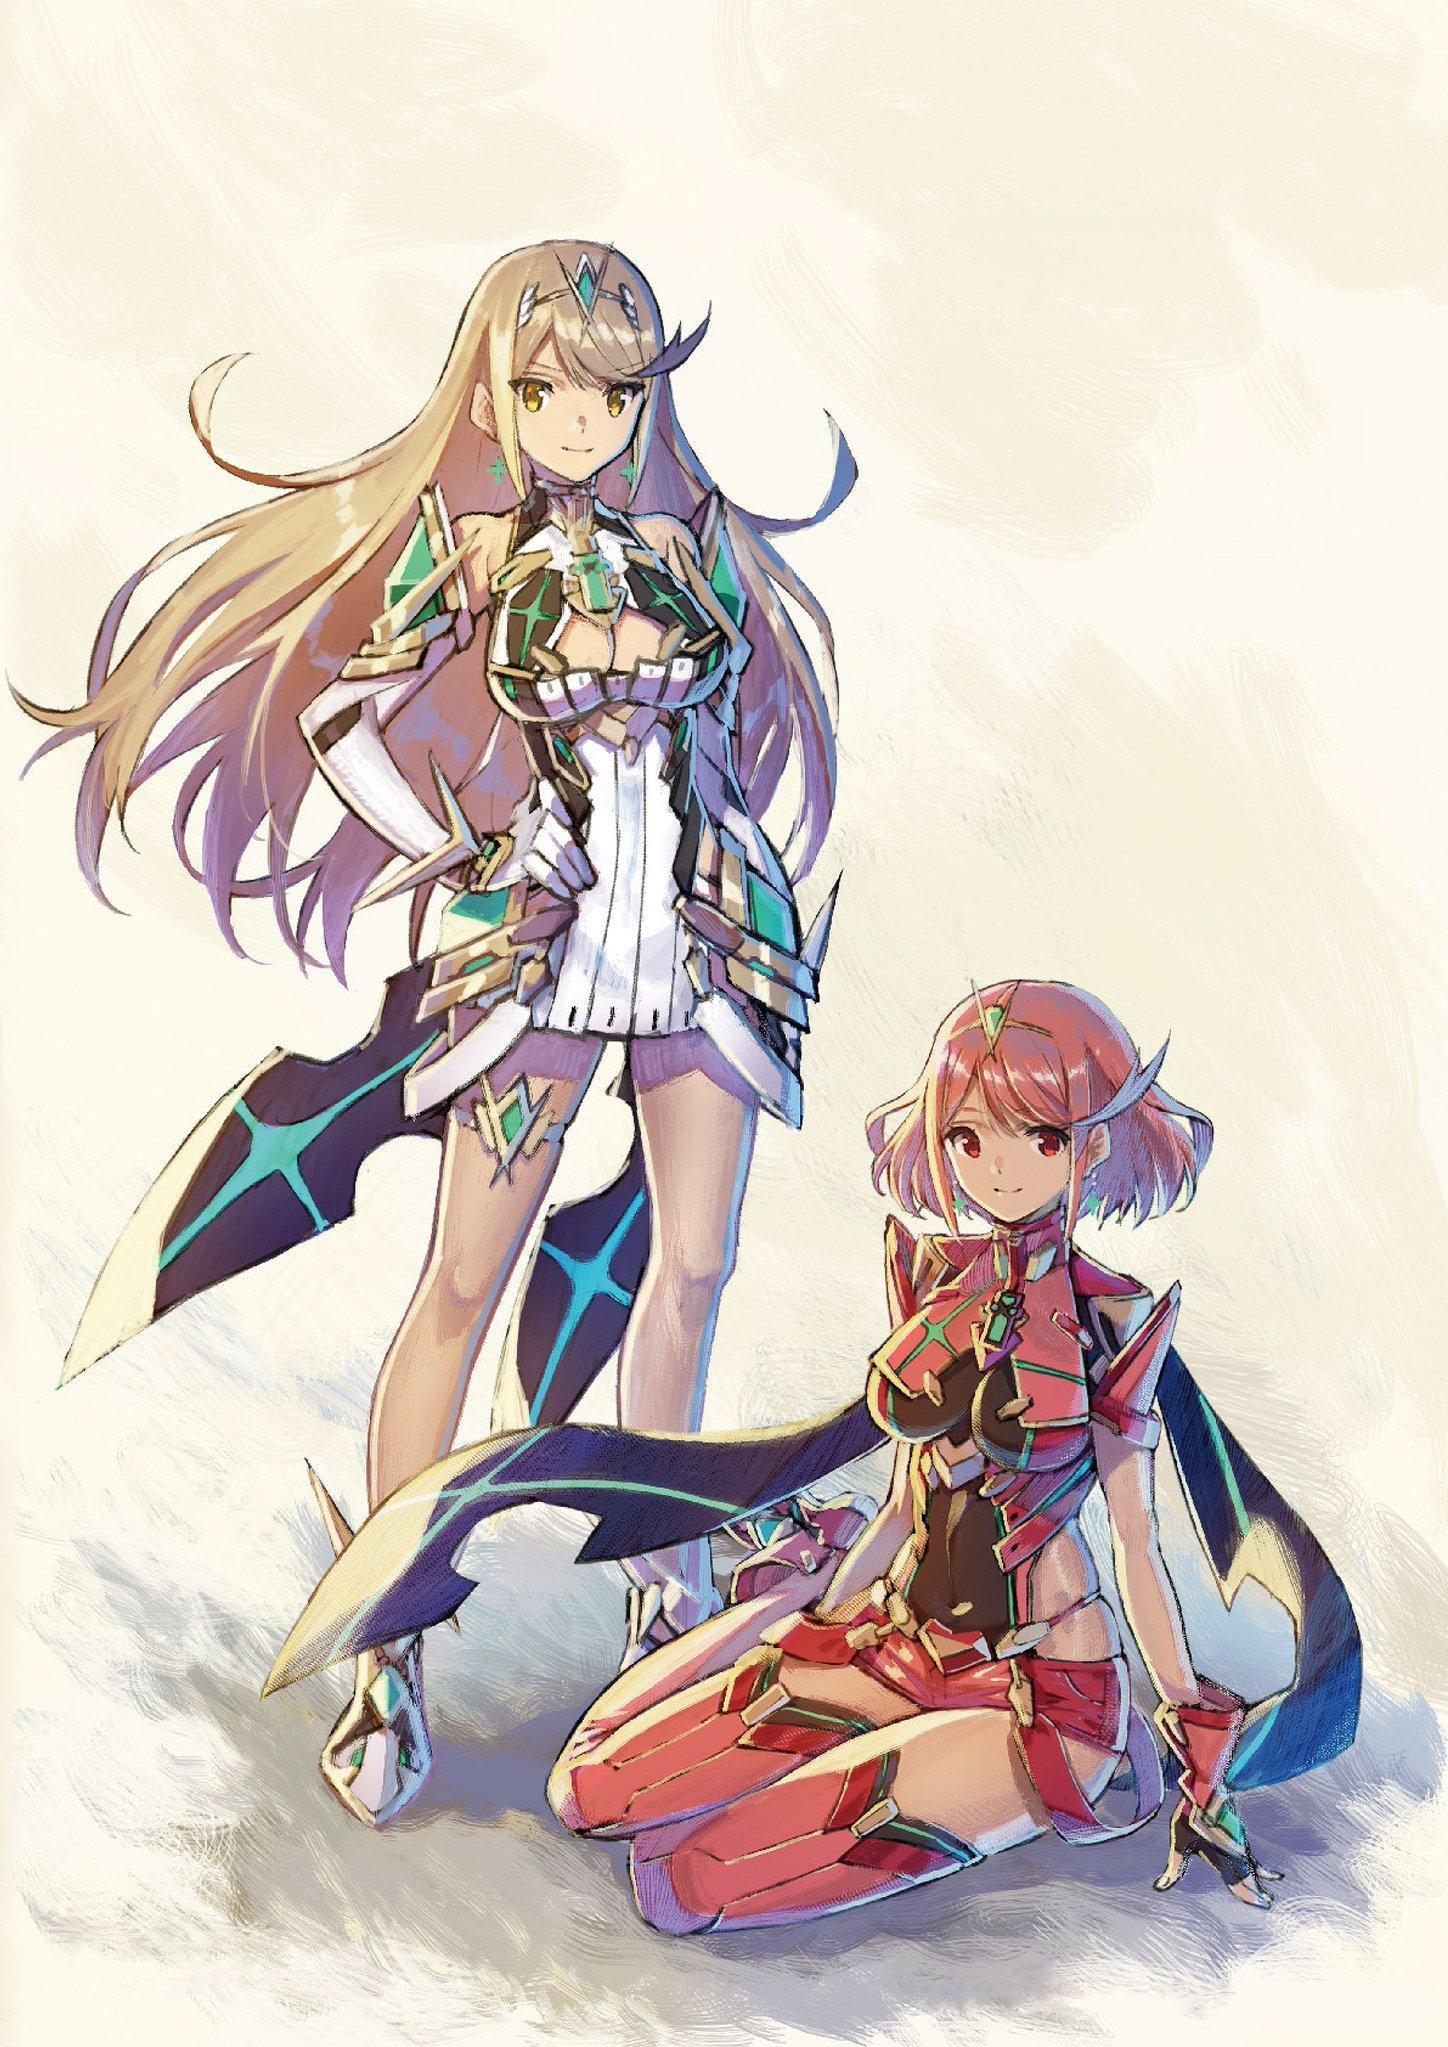 Pyra and Mythra Wallpaper from official art book